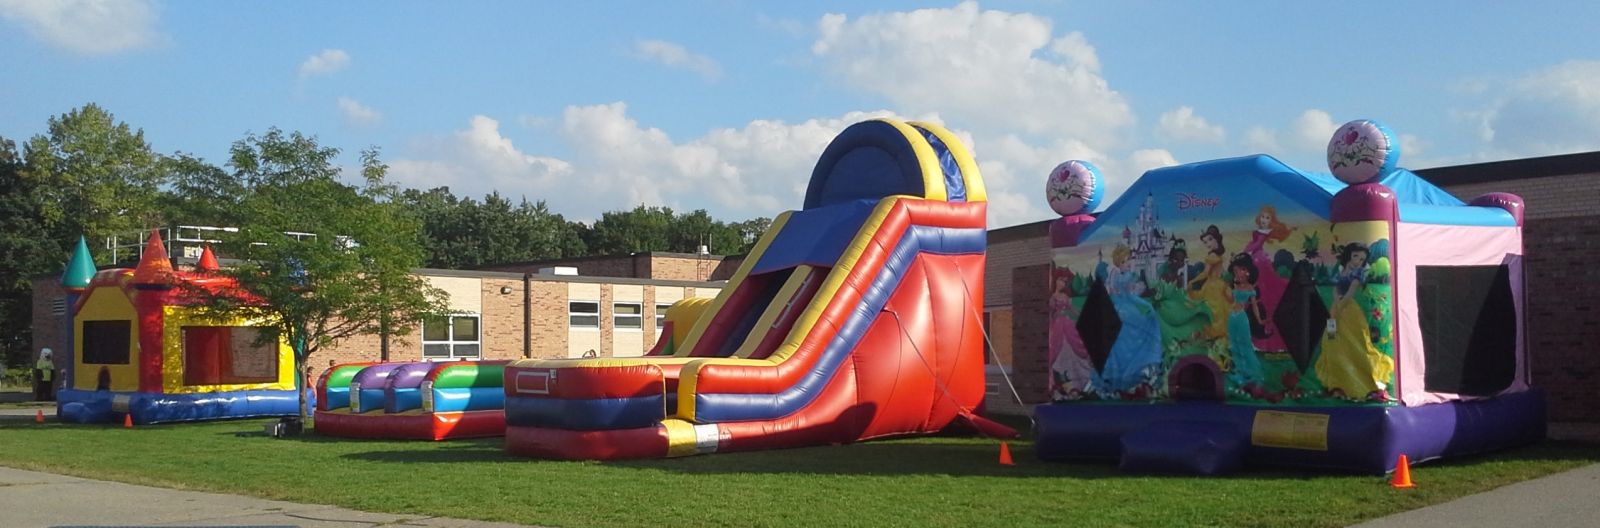 School carnival with Disney Princess Bounce House, GIANT Slide, Bungee Run, and Castle